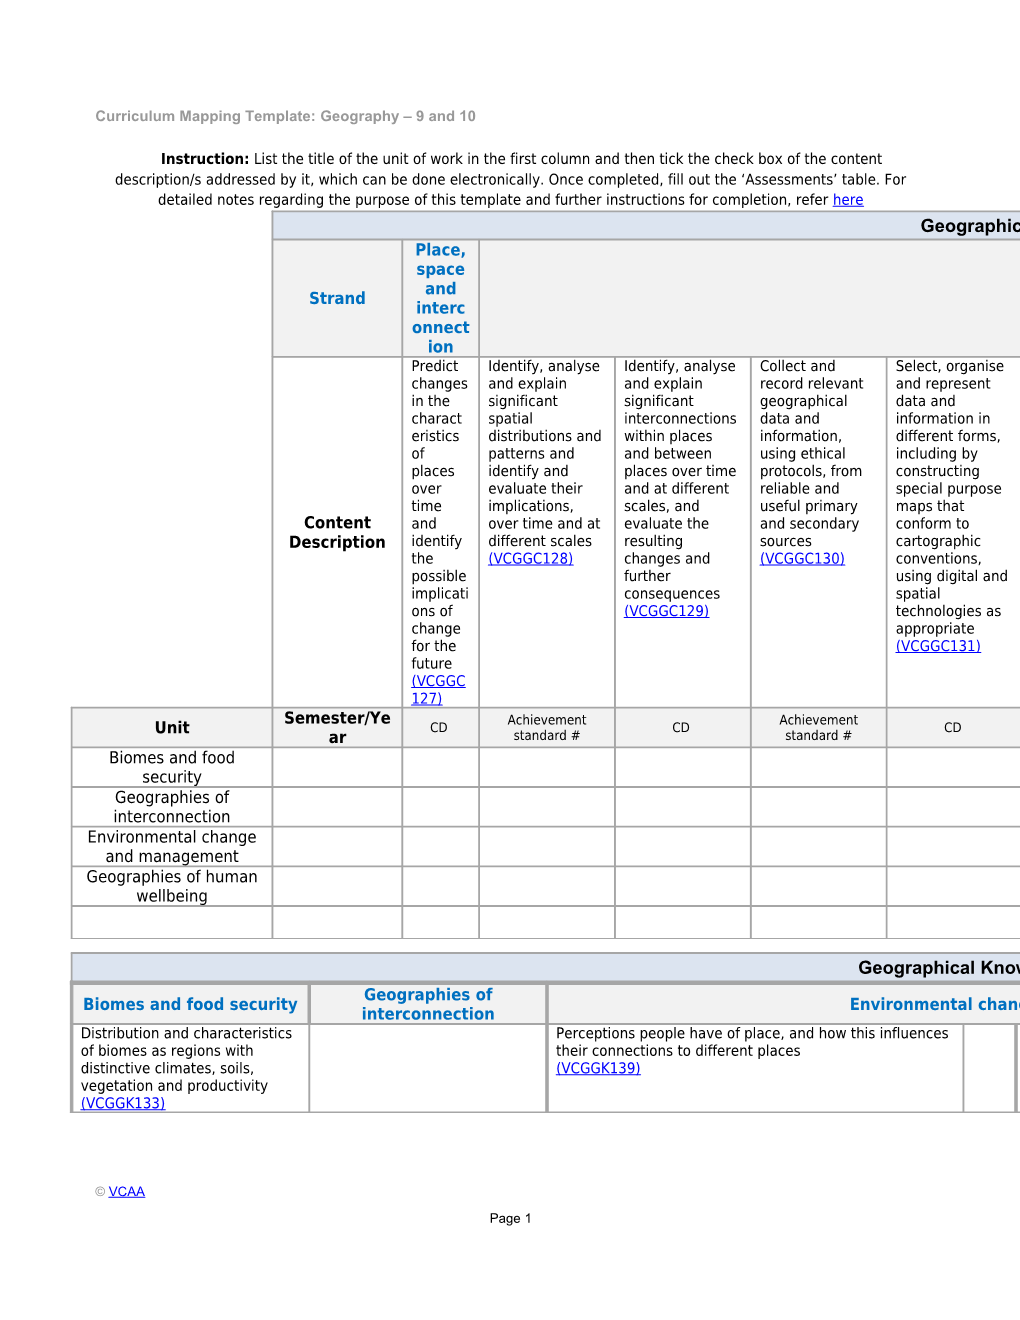 Curriculum Mapping Template: Geography 9 and 10